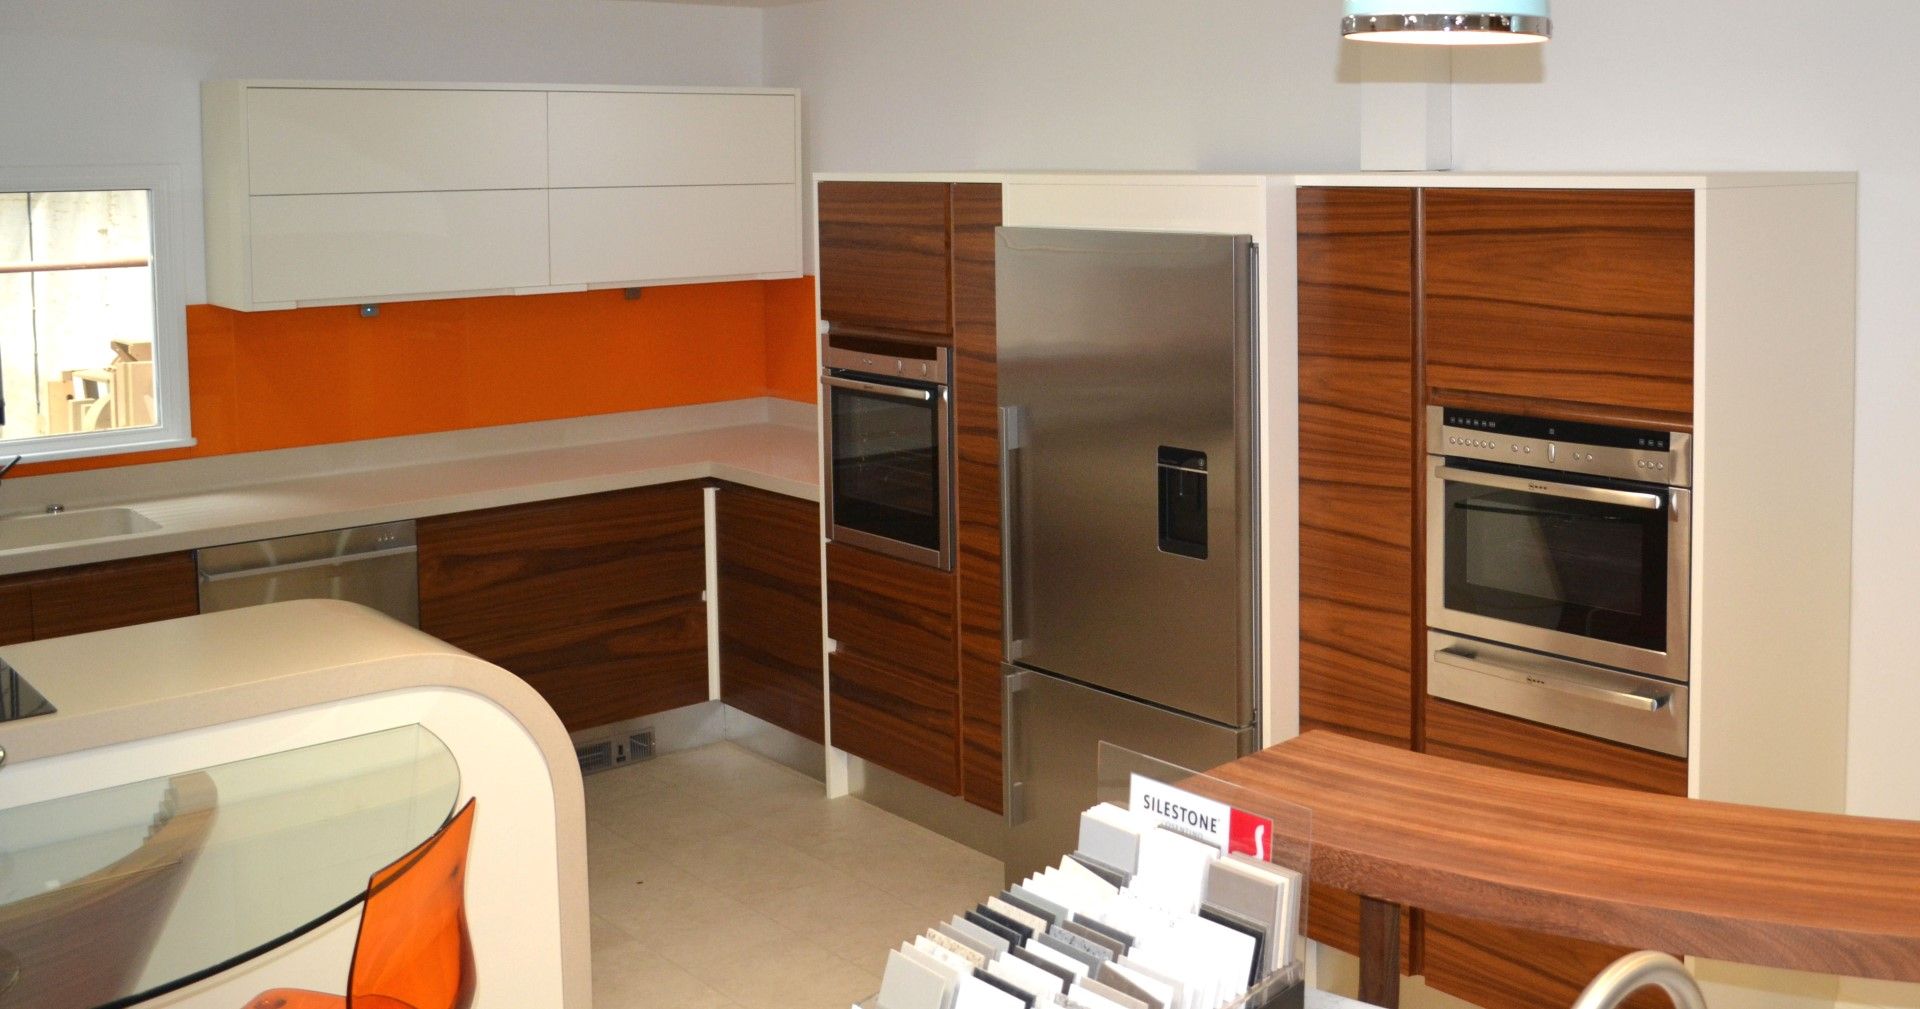 1 x Unused Bespoke Display Kitchen in Perfect Condition - Includes Unused Neff and Fisher & Paykel - Image 2 of 60